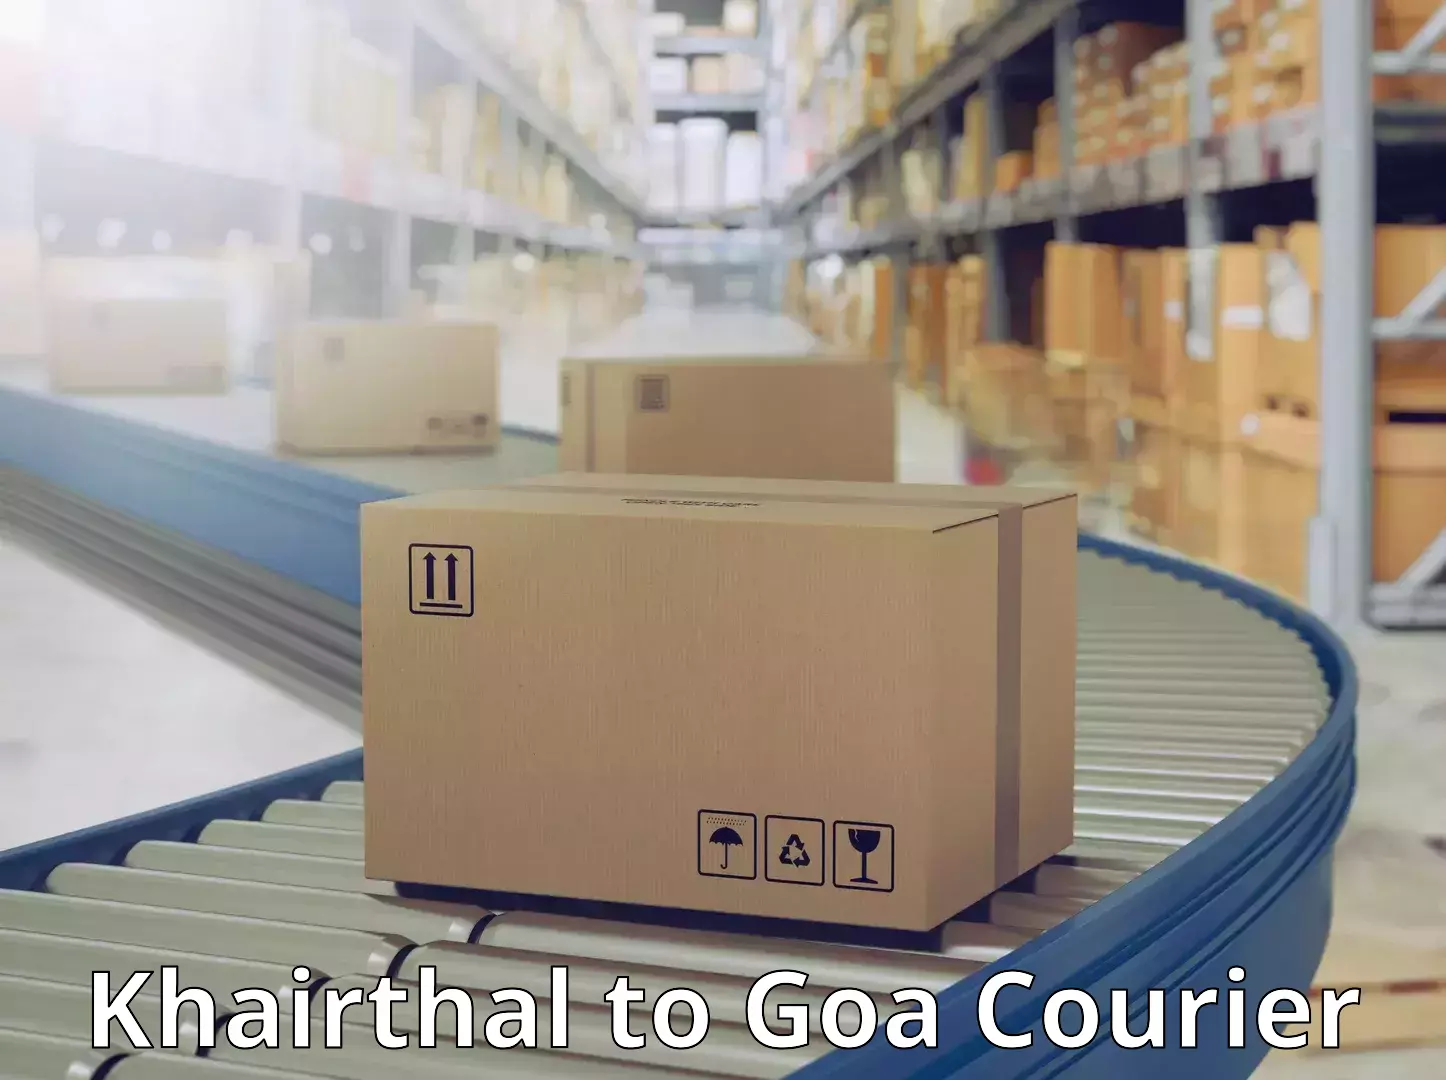 State-of-the-art courier technology Khairthal to Goa